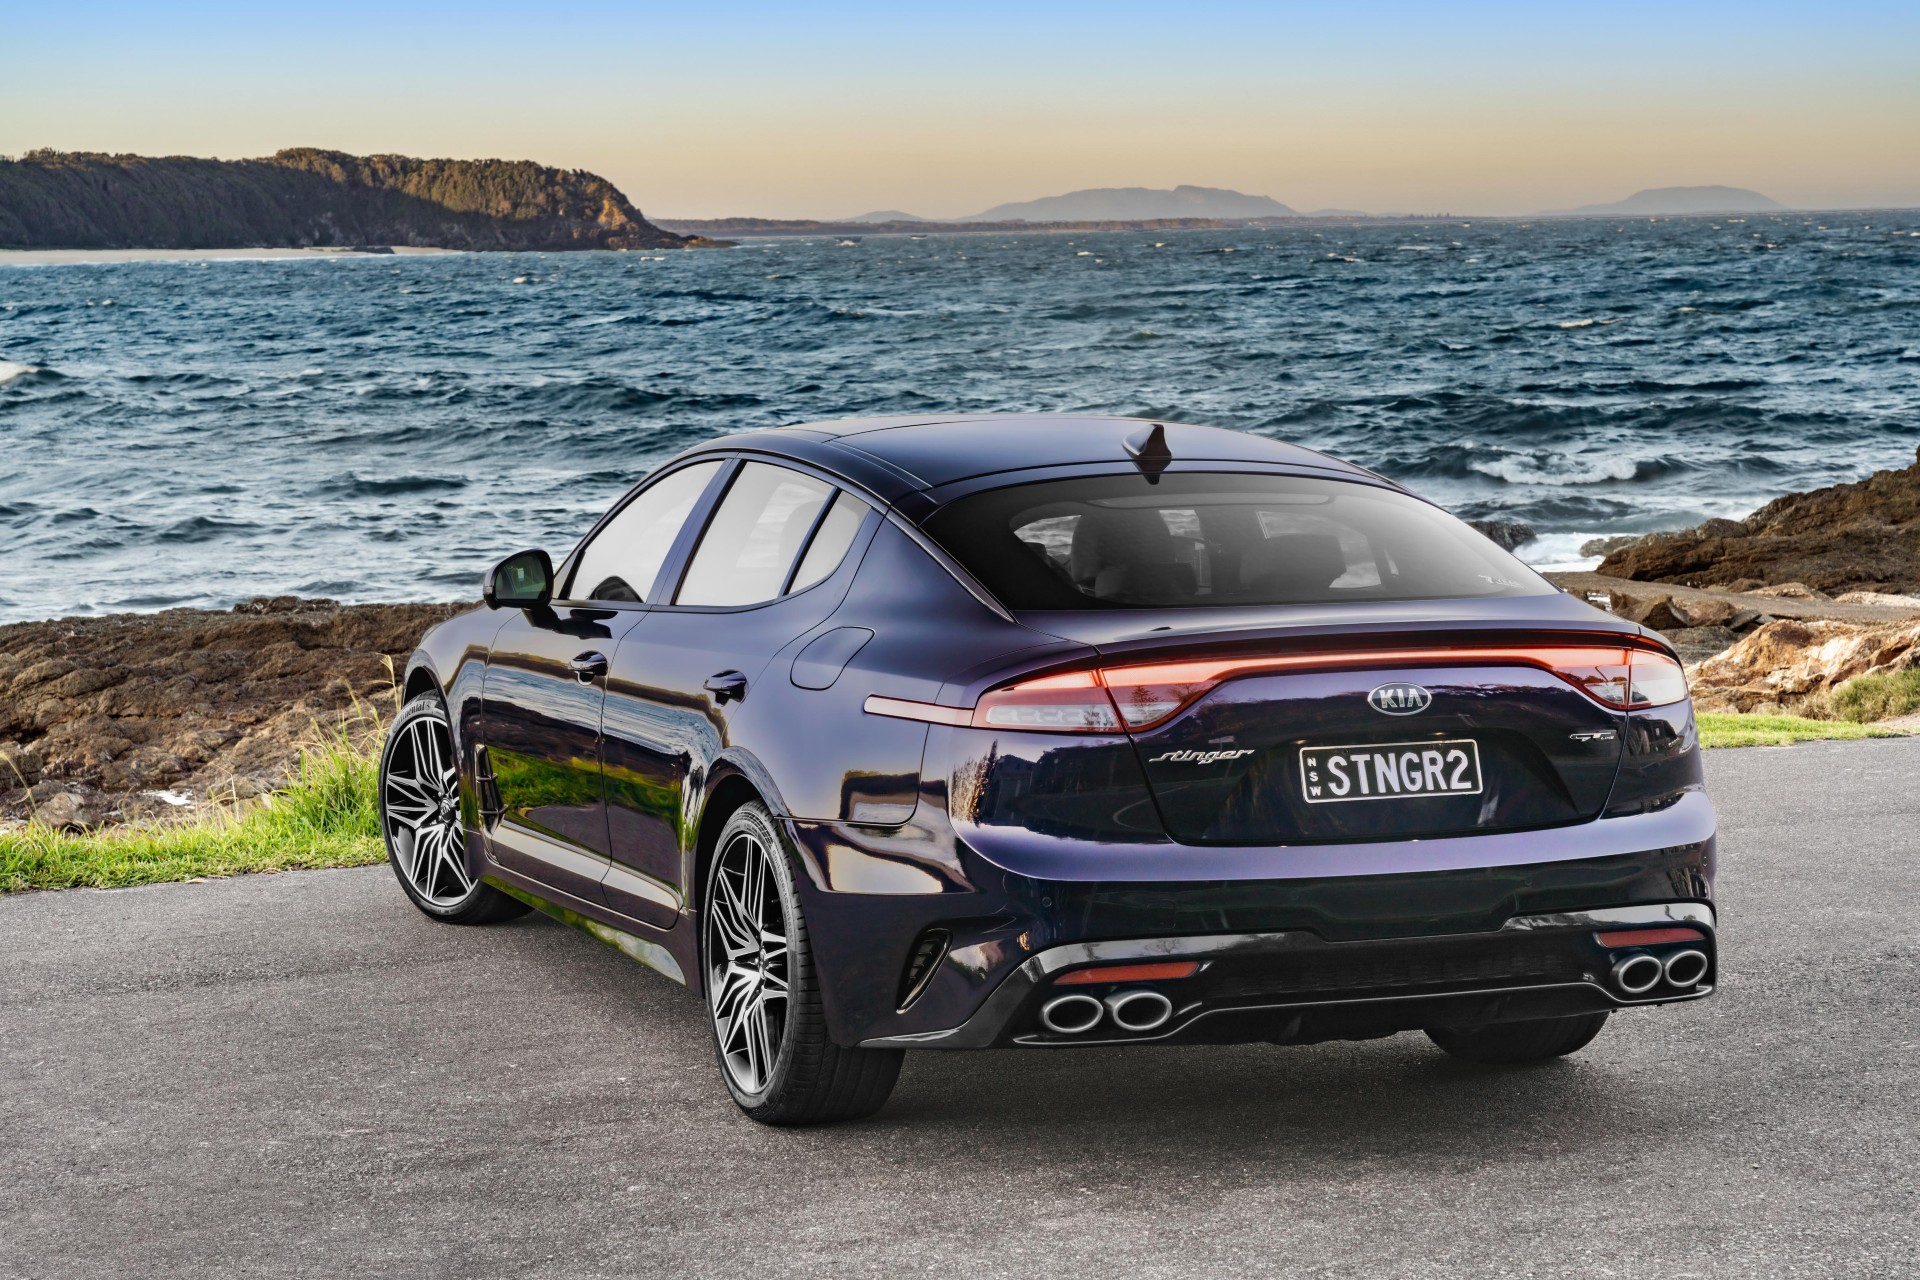 The Kia Stinger works "exceptionally well" in Australia, despite reports that it has been discontinued